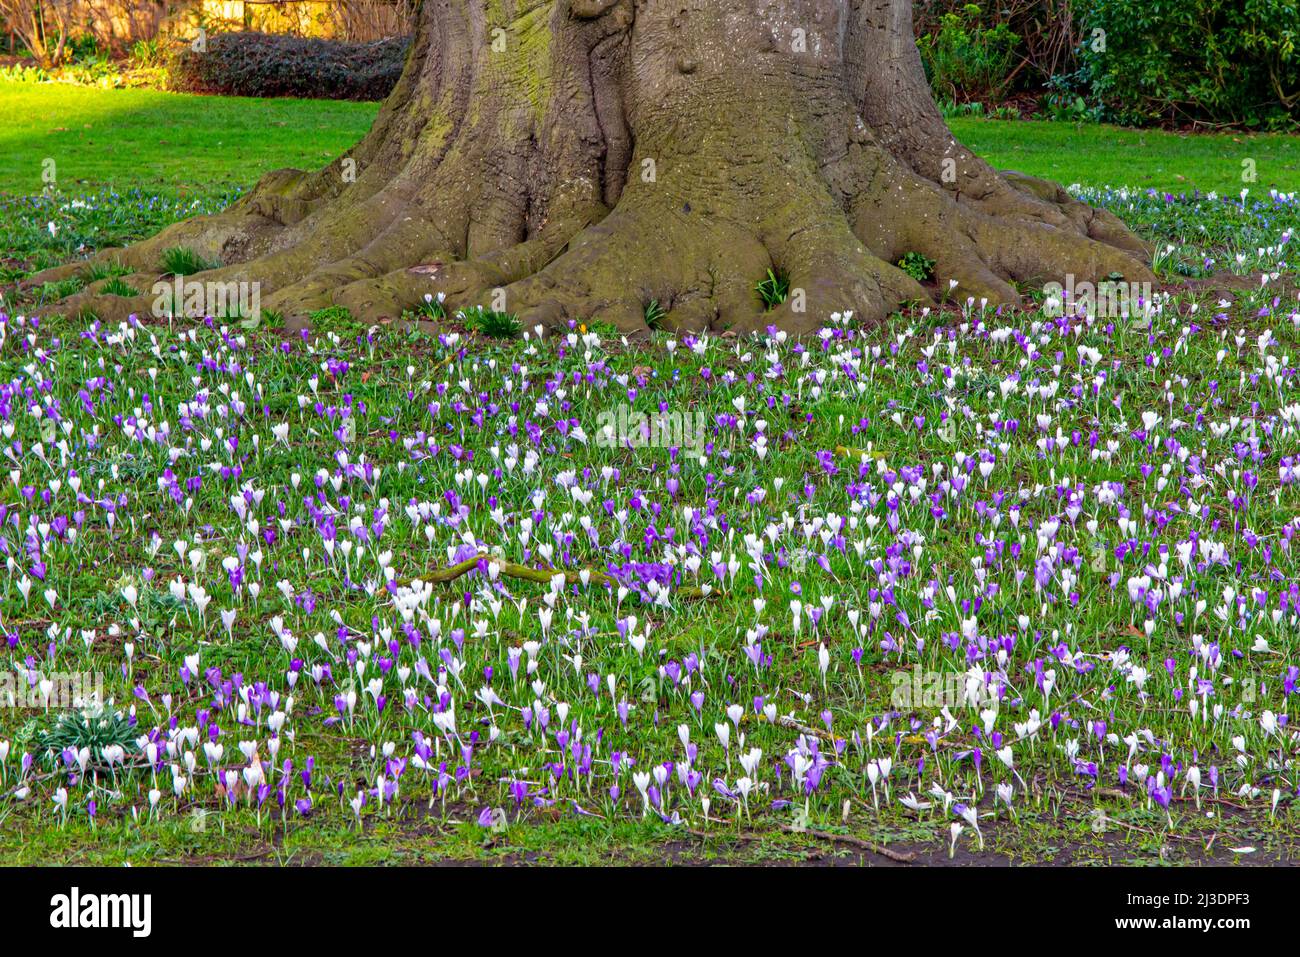 Crocus flowers growing underneath an old tree on a lawn in early spring. Stock Photo